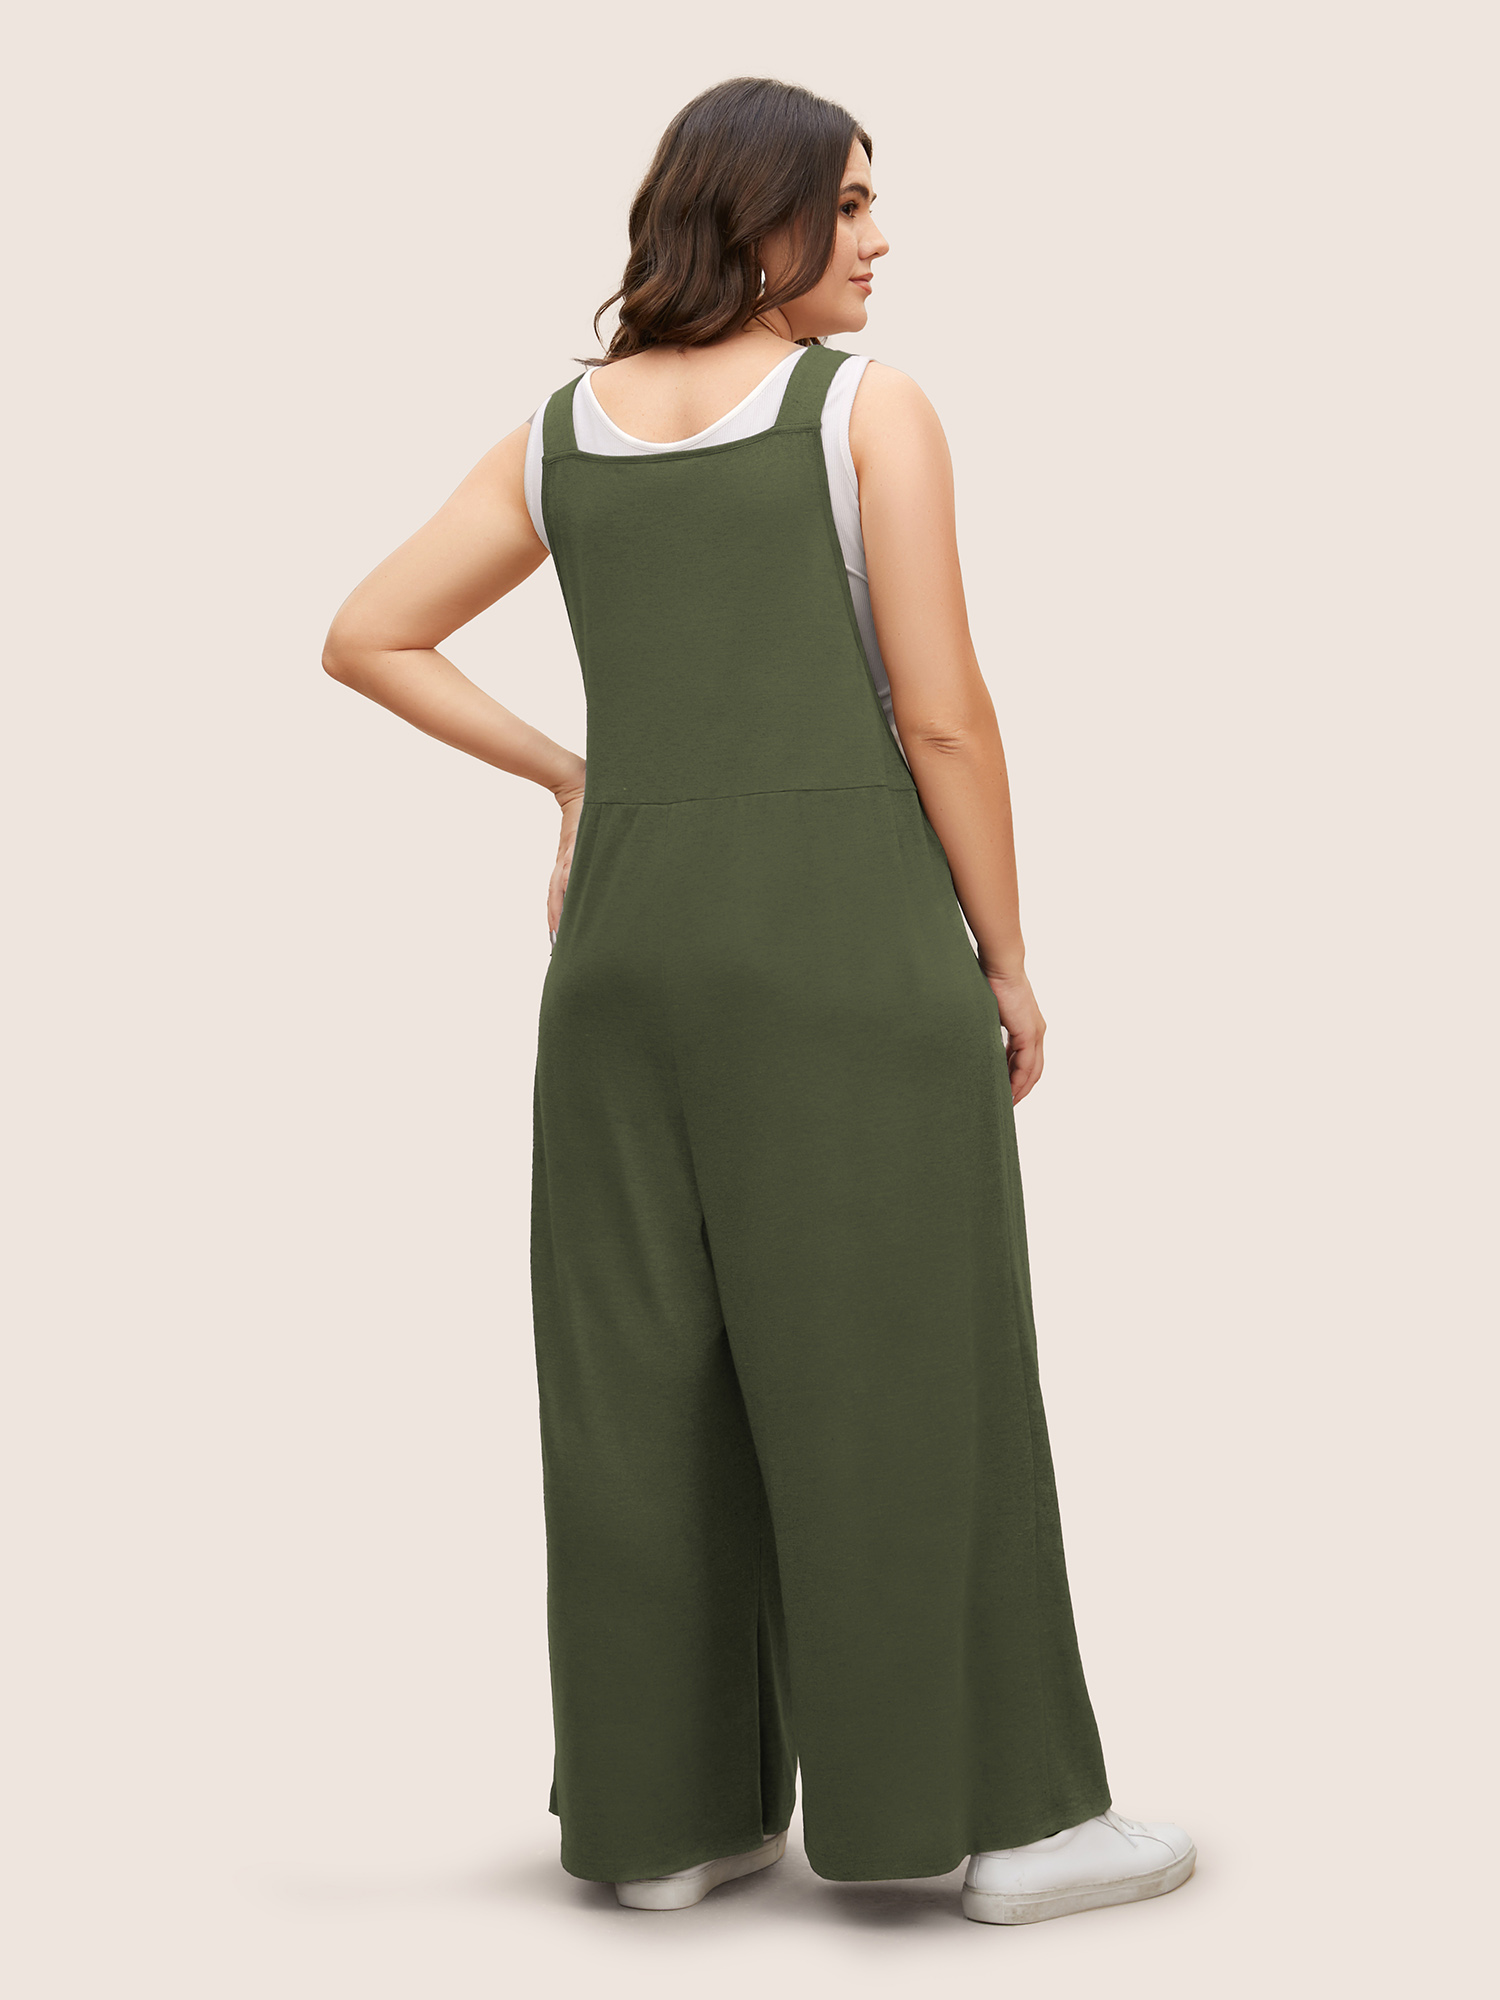 

Plus Size ArmyGreen Supersoft Essentials Solid Pleated Pocket Jumpsuit Women Casual Sleeveless Non Everyday Loose Jumpsuits BloomChic